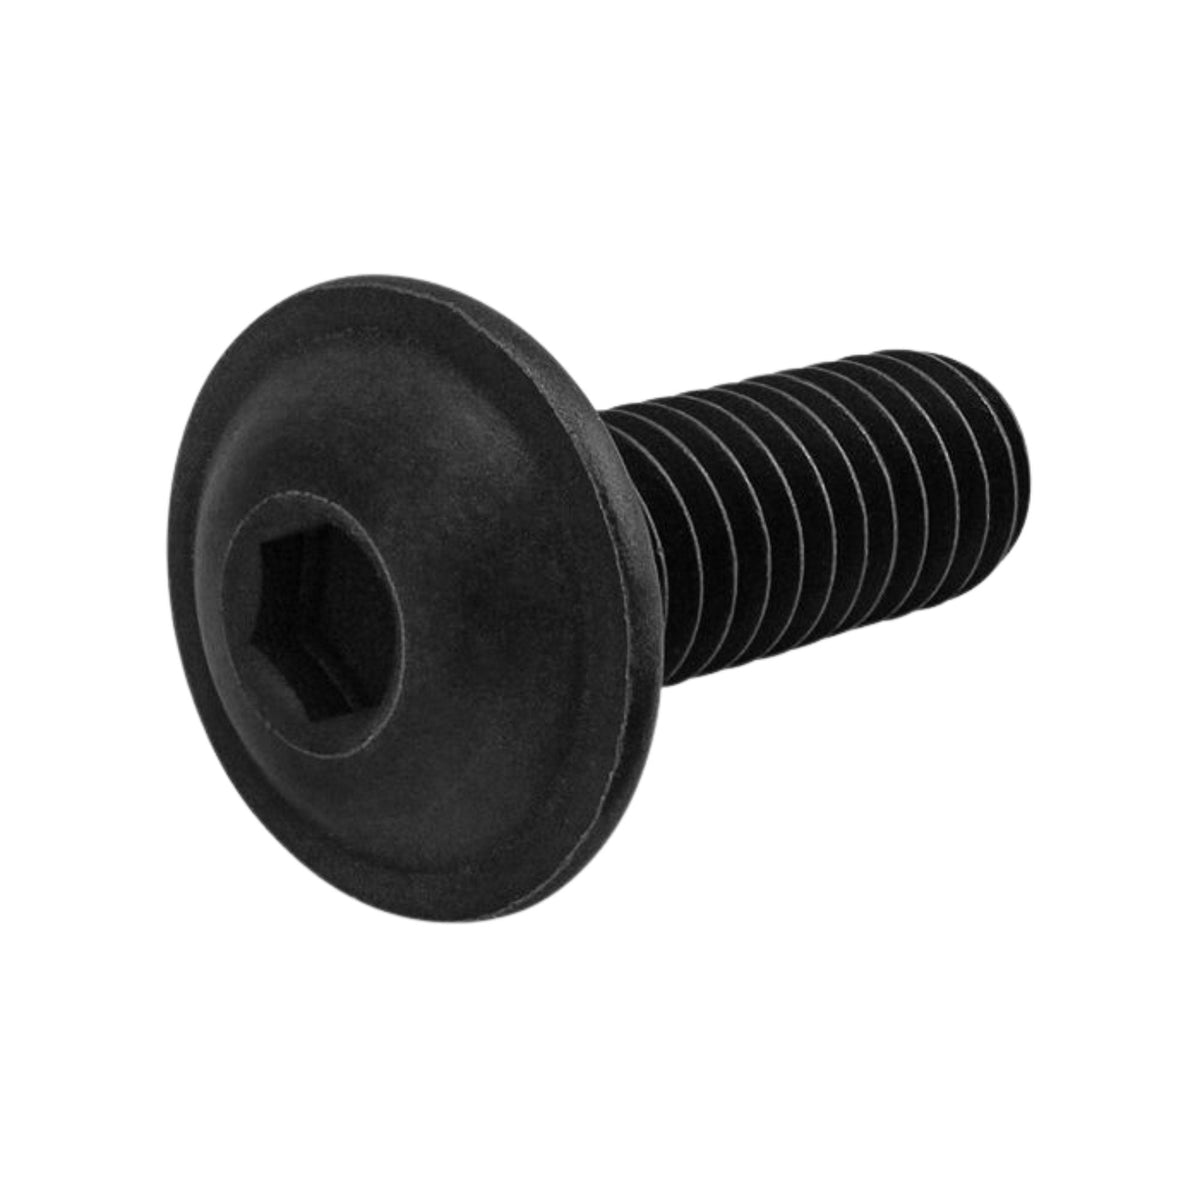 side view of a black button head cap screw with the head on the left and the threading on the right